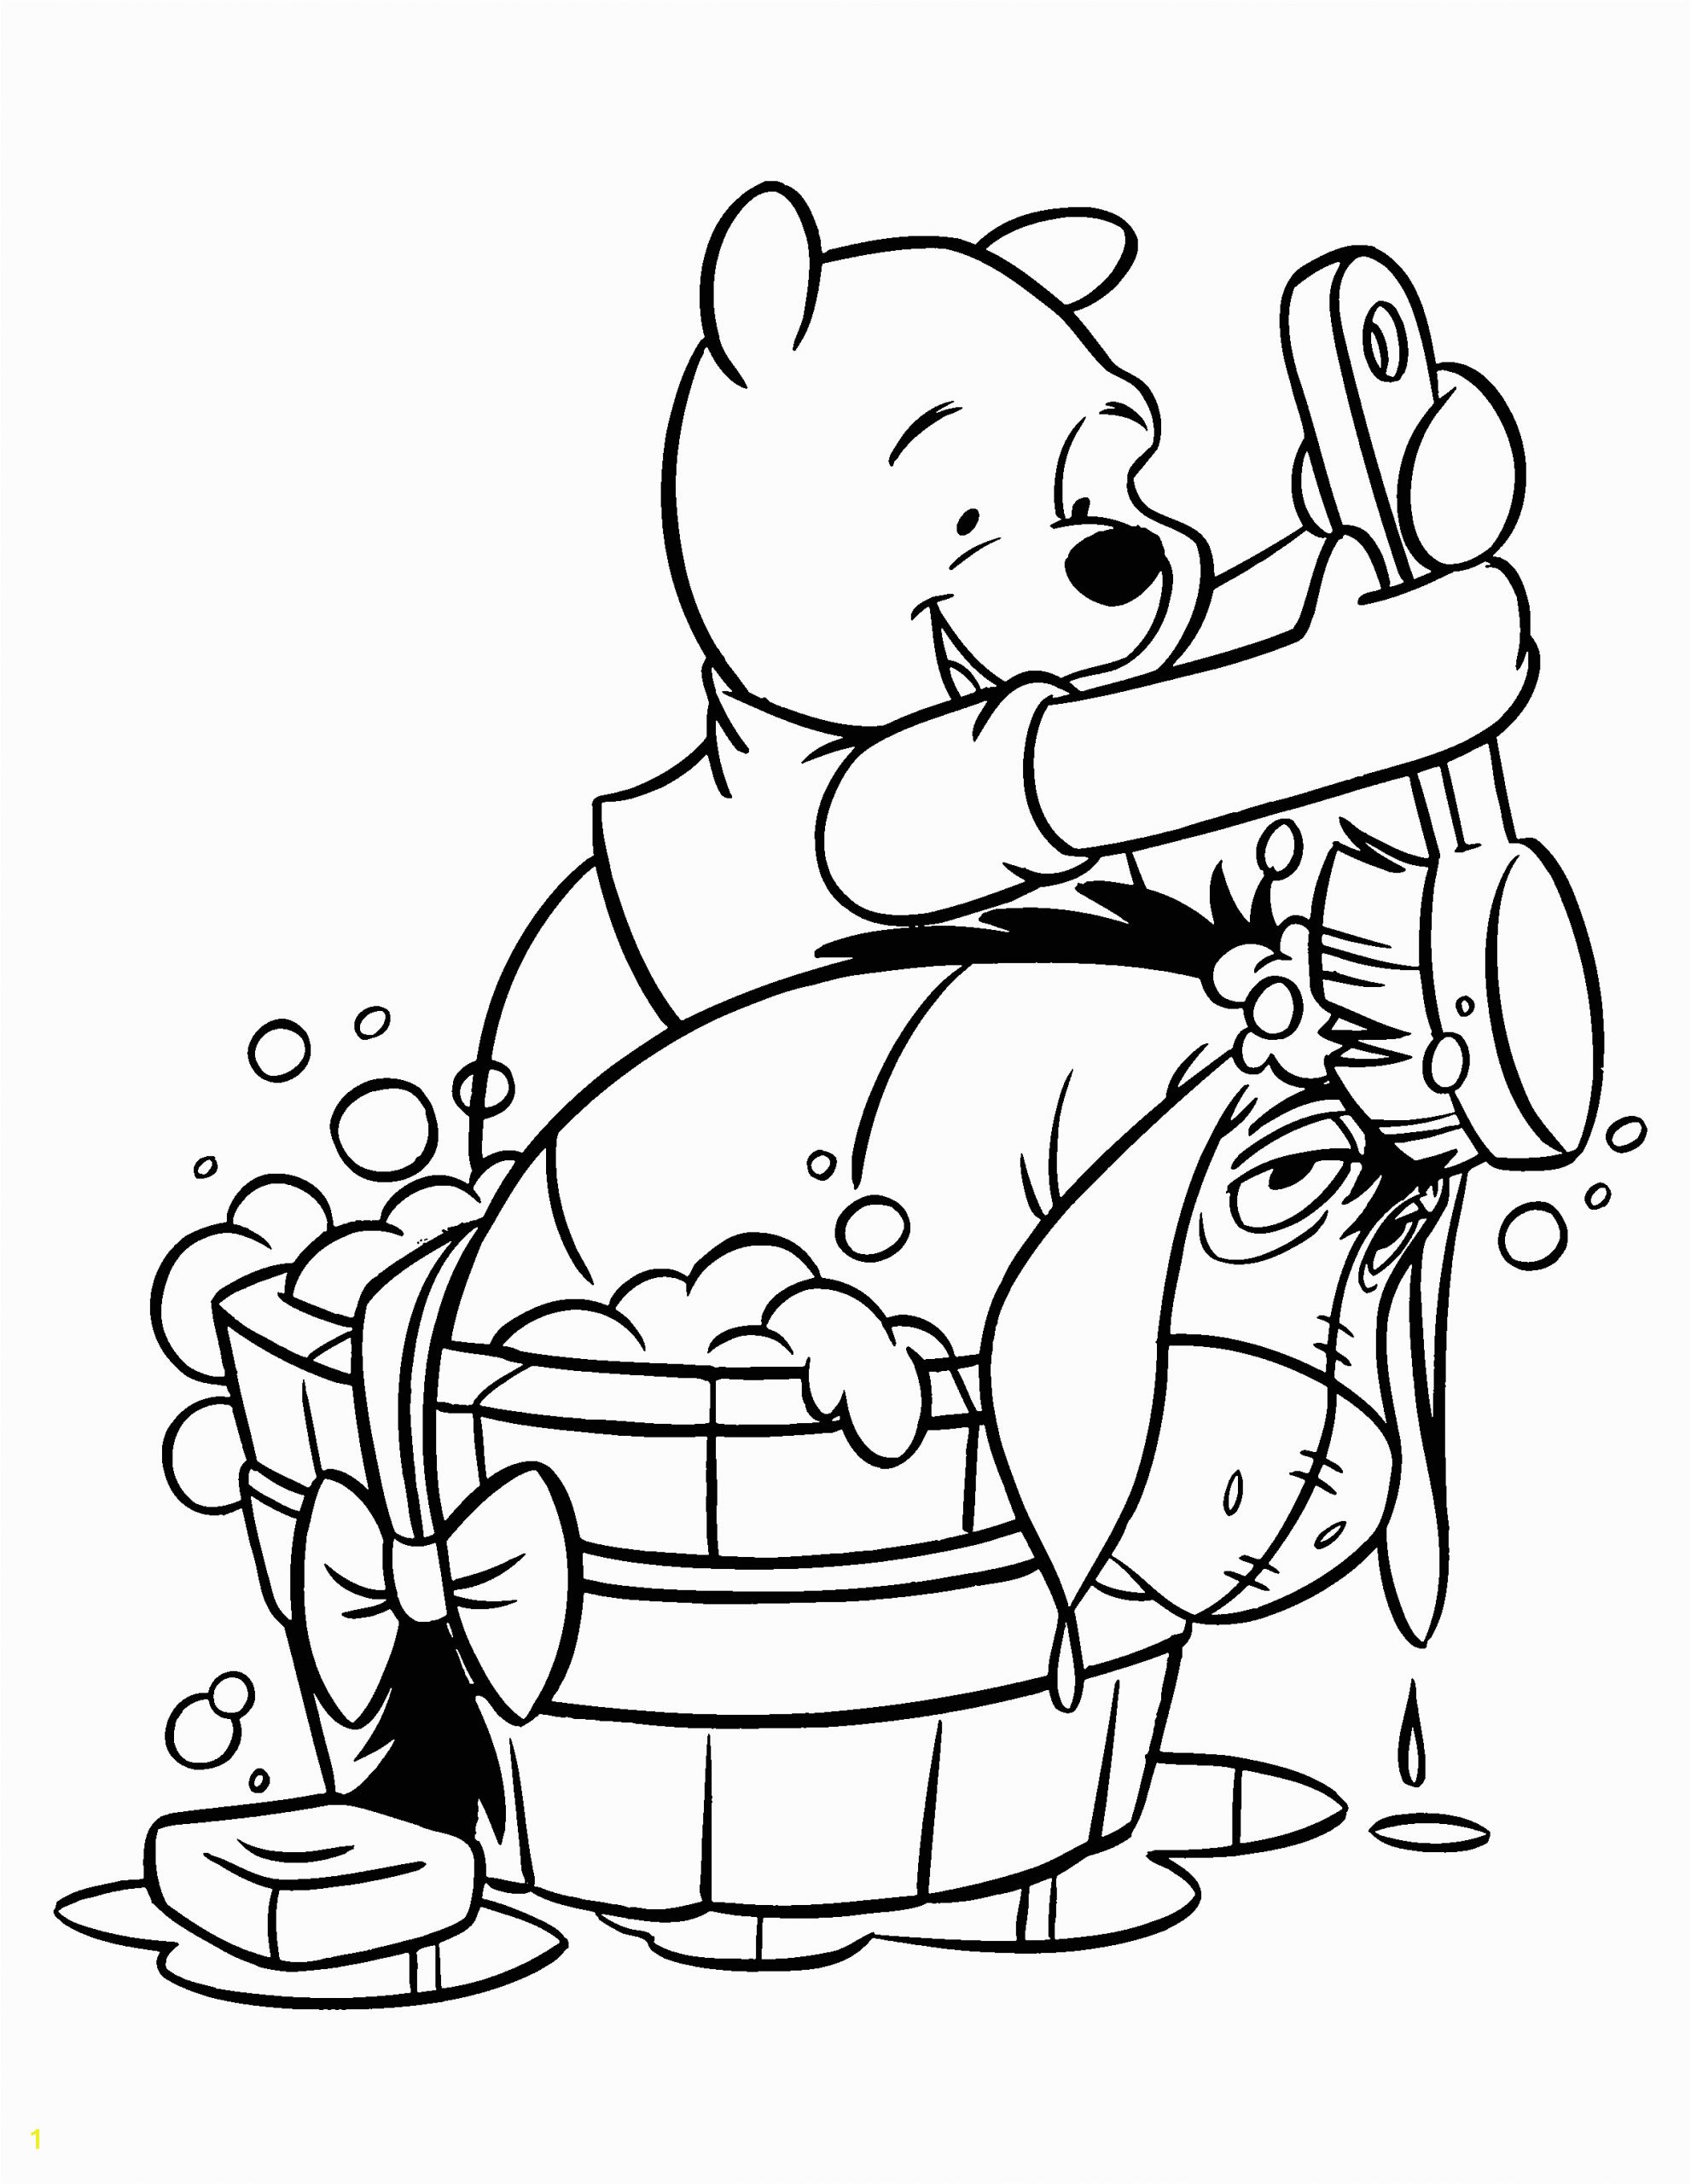 Coloring Pages Winnie the Pooh Eeyore Free Printable Disney Eeyore Coloring Pages Prints